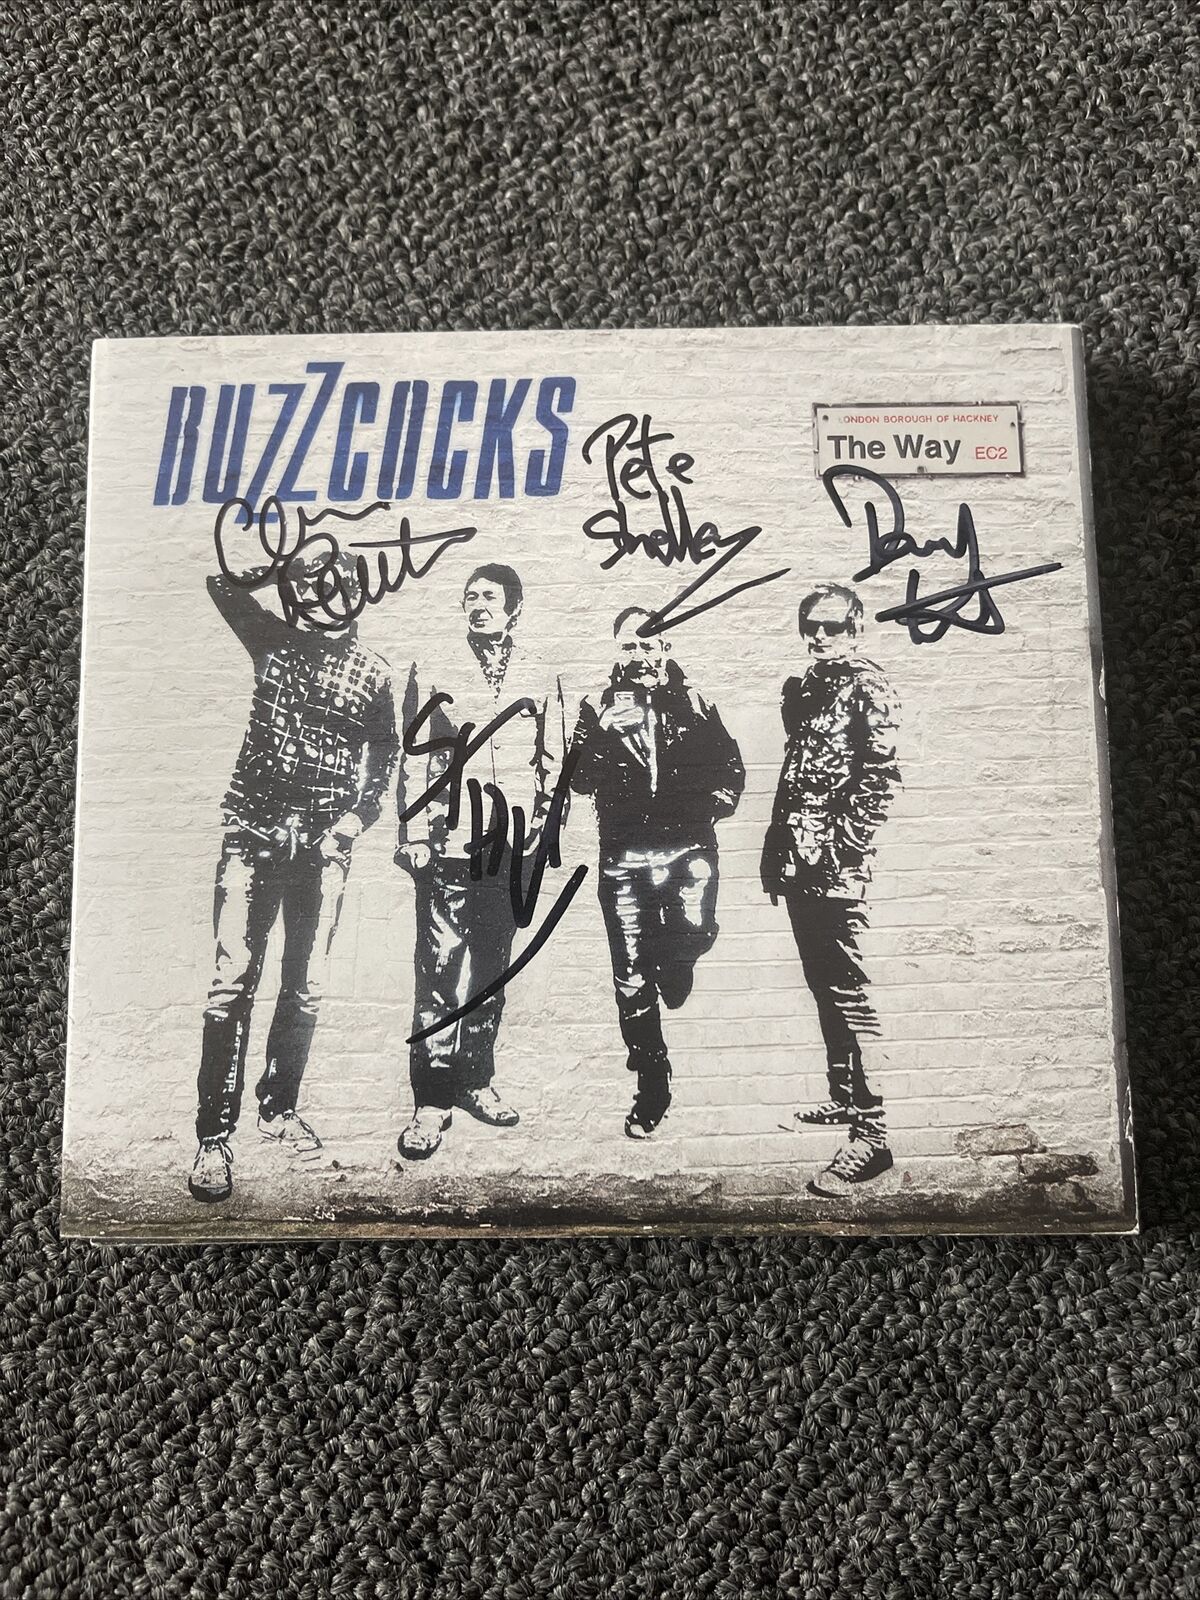 2014 BUZZCOCKS The Way CD Signed By ENTIRE BAND Rare Autograph Auto Real Punk